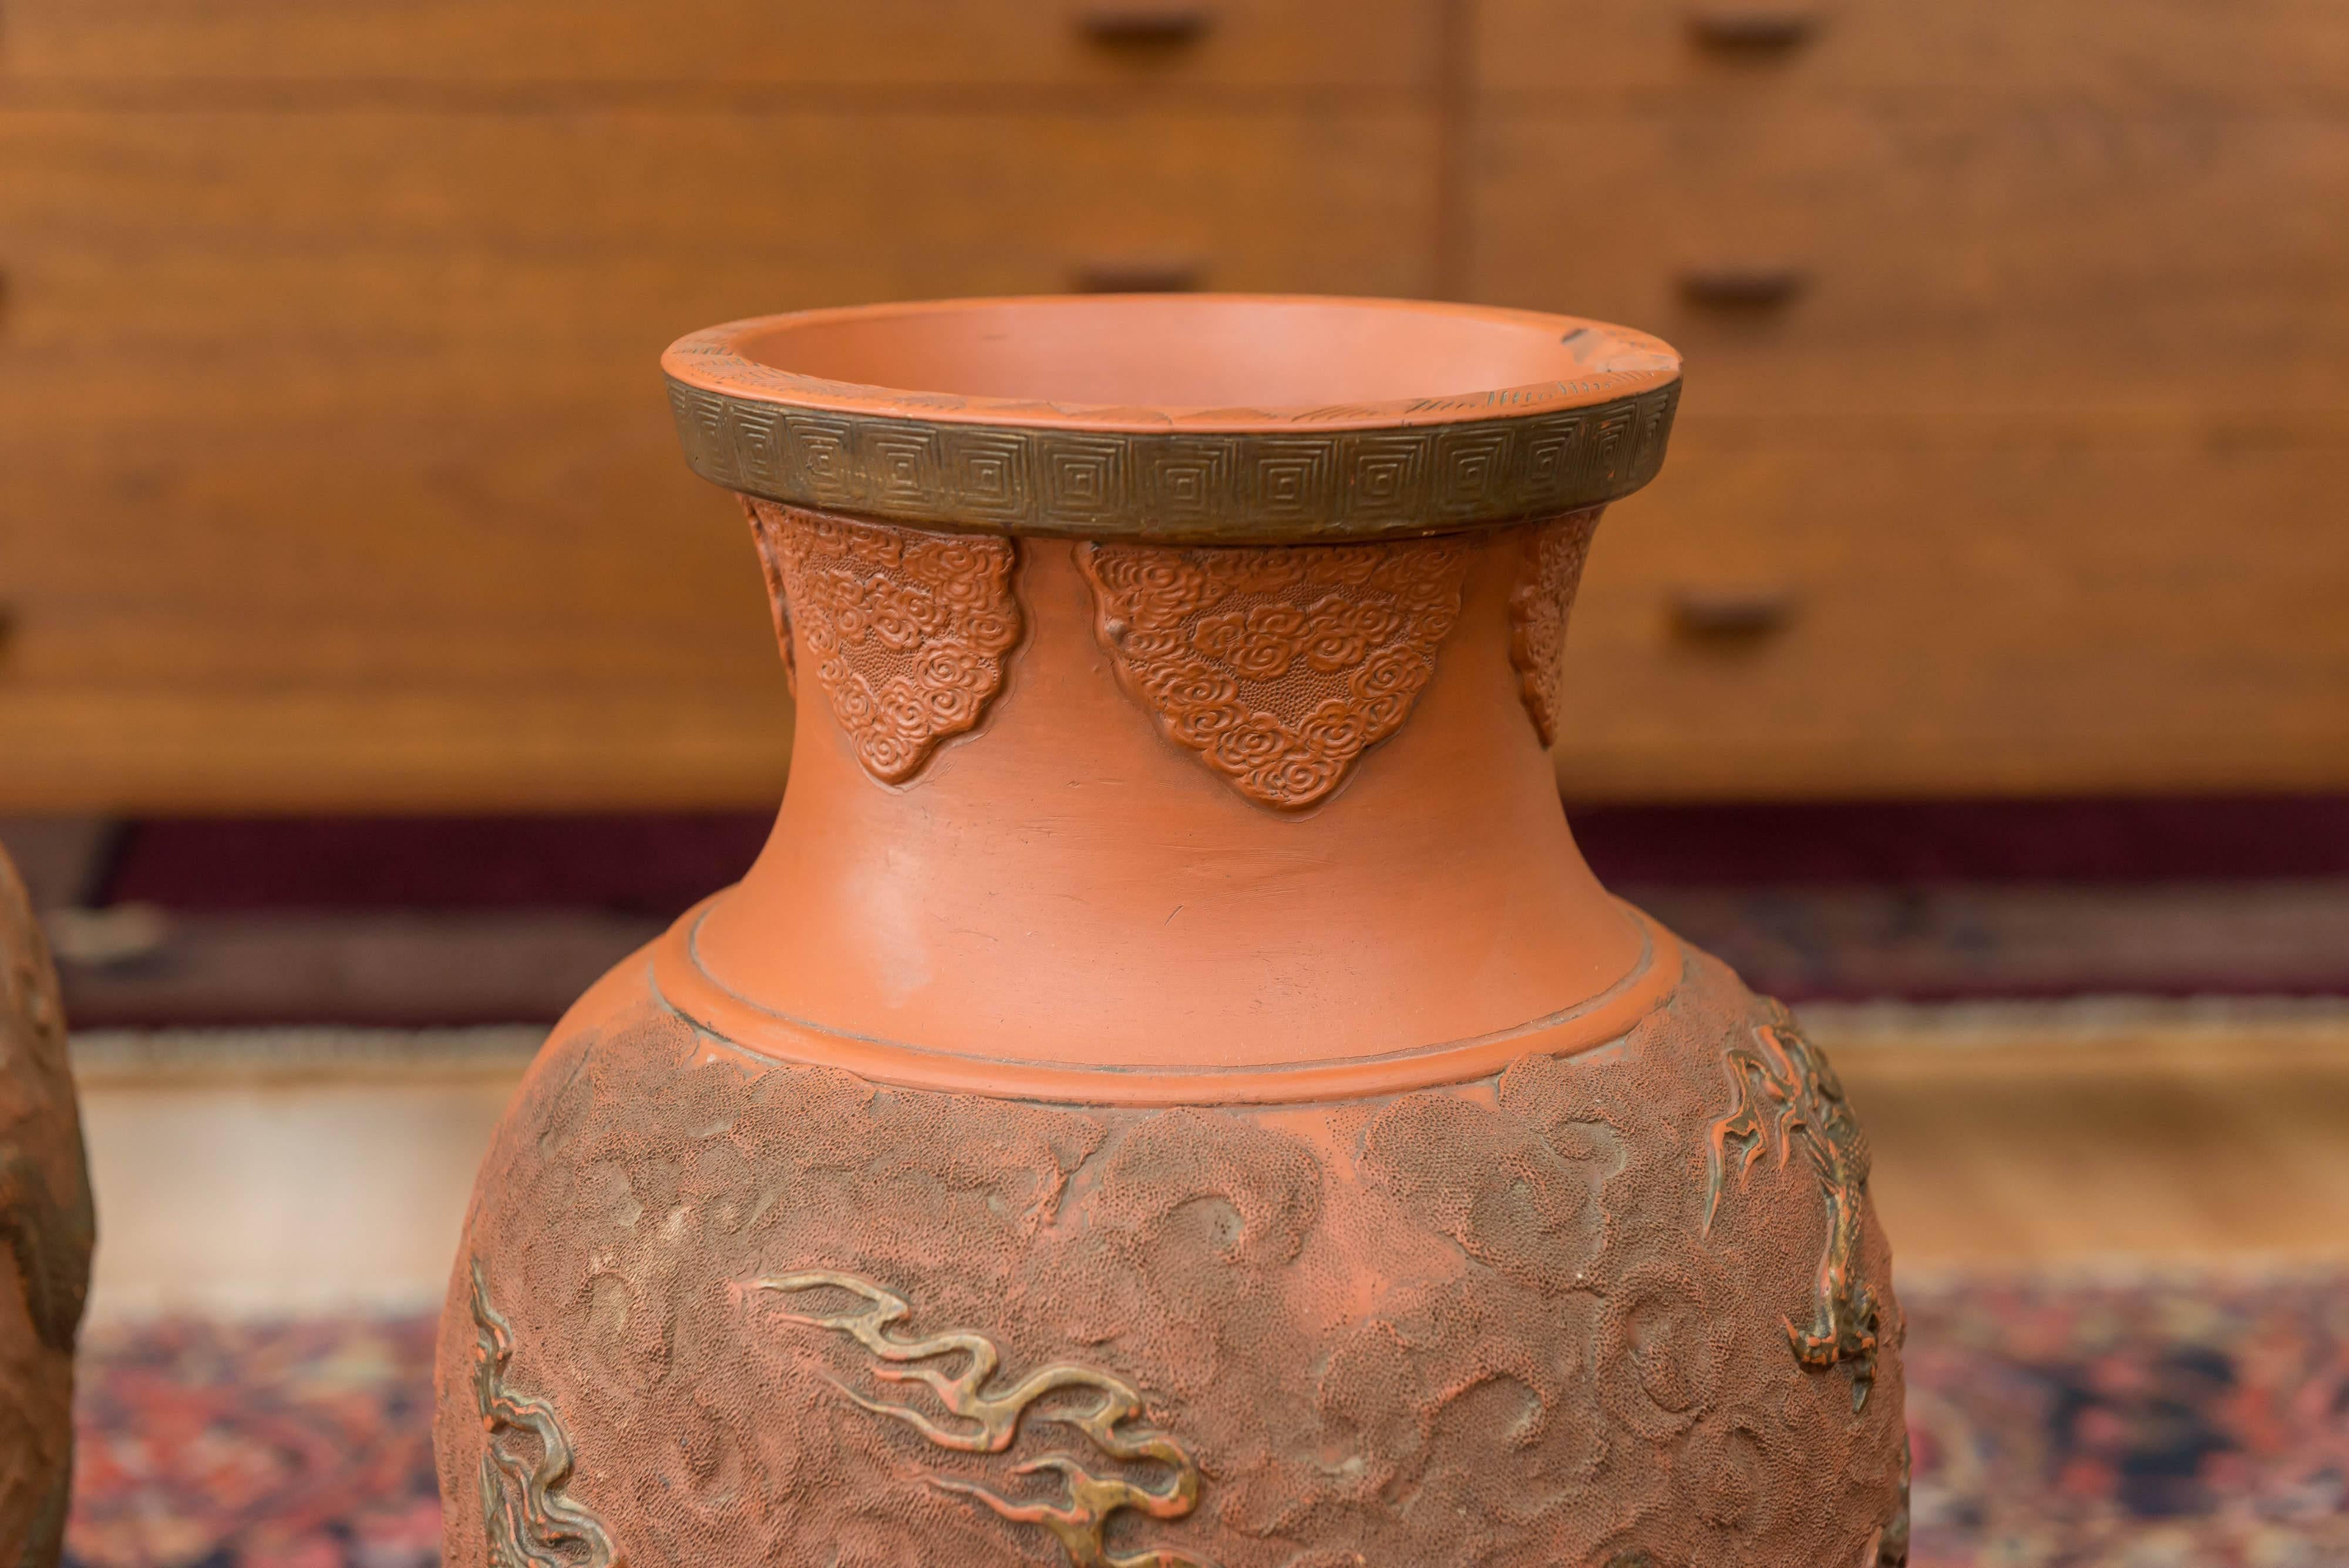 Offered here are a pair of Bizen pottery vases (from Japan), with dragon design around their sides. circa late 19th century to early 20th century.